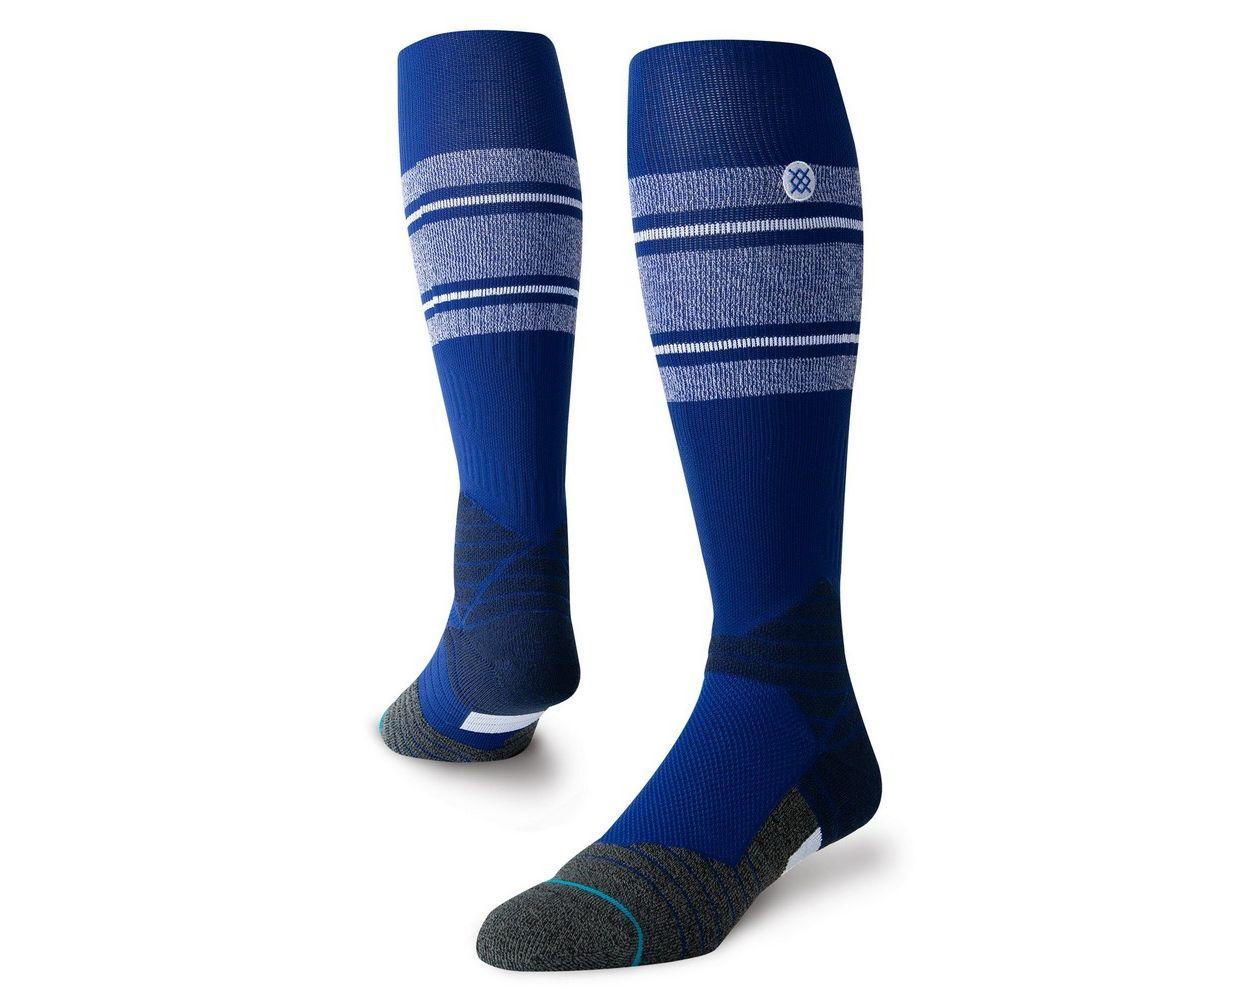  Small SoxPRO navy grip socks size small (5-8.5) : Clothing,  Shoes & Jewelry